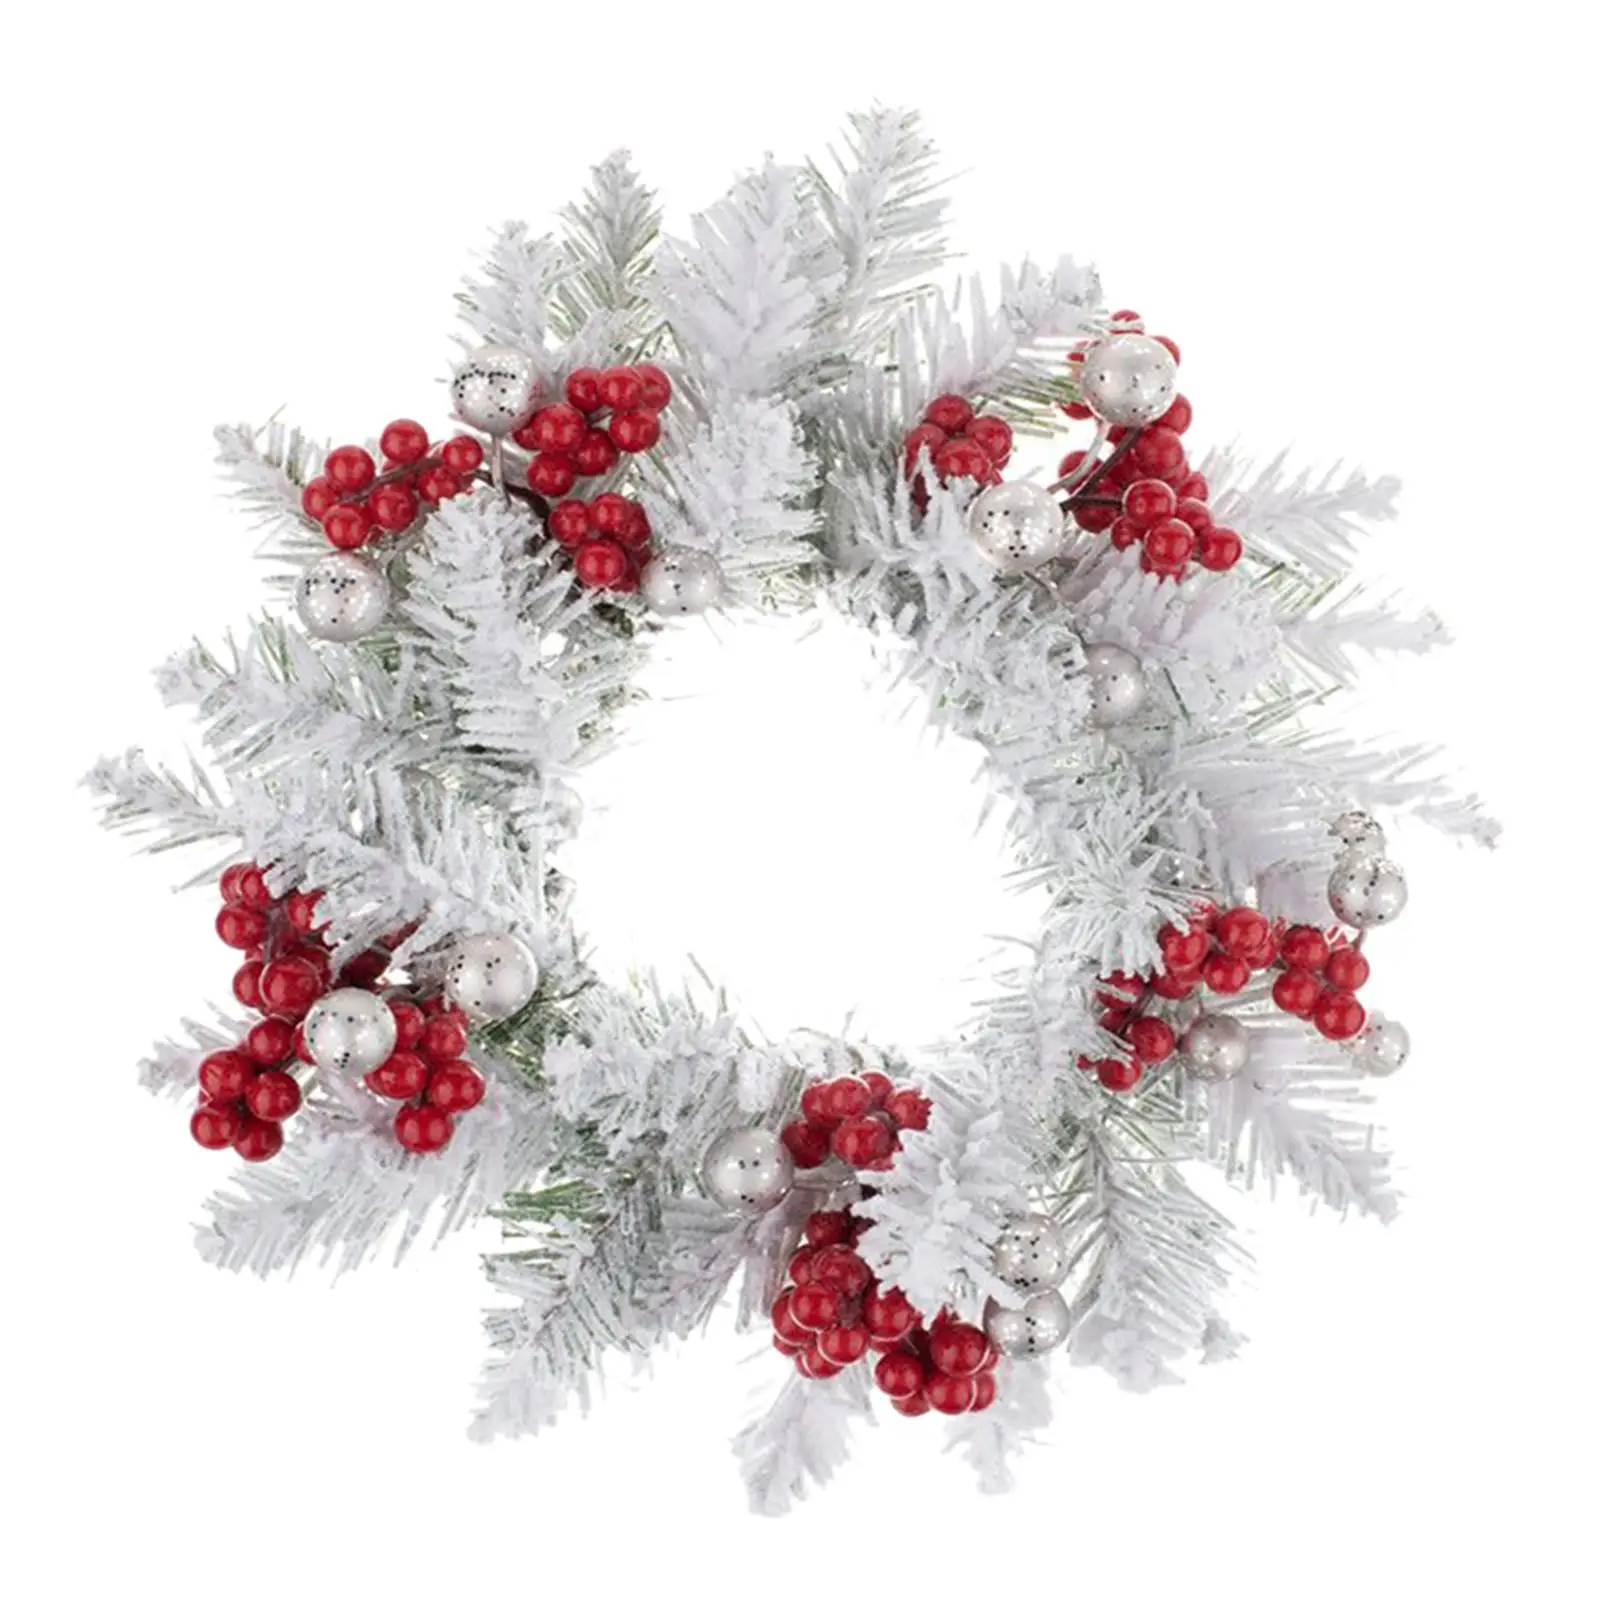 

Christmas Candle Wreath Candles Base Holder Rustic Creative Wreath for Table Centerpiece Dining Room Wedding Holiday Xmas